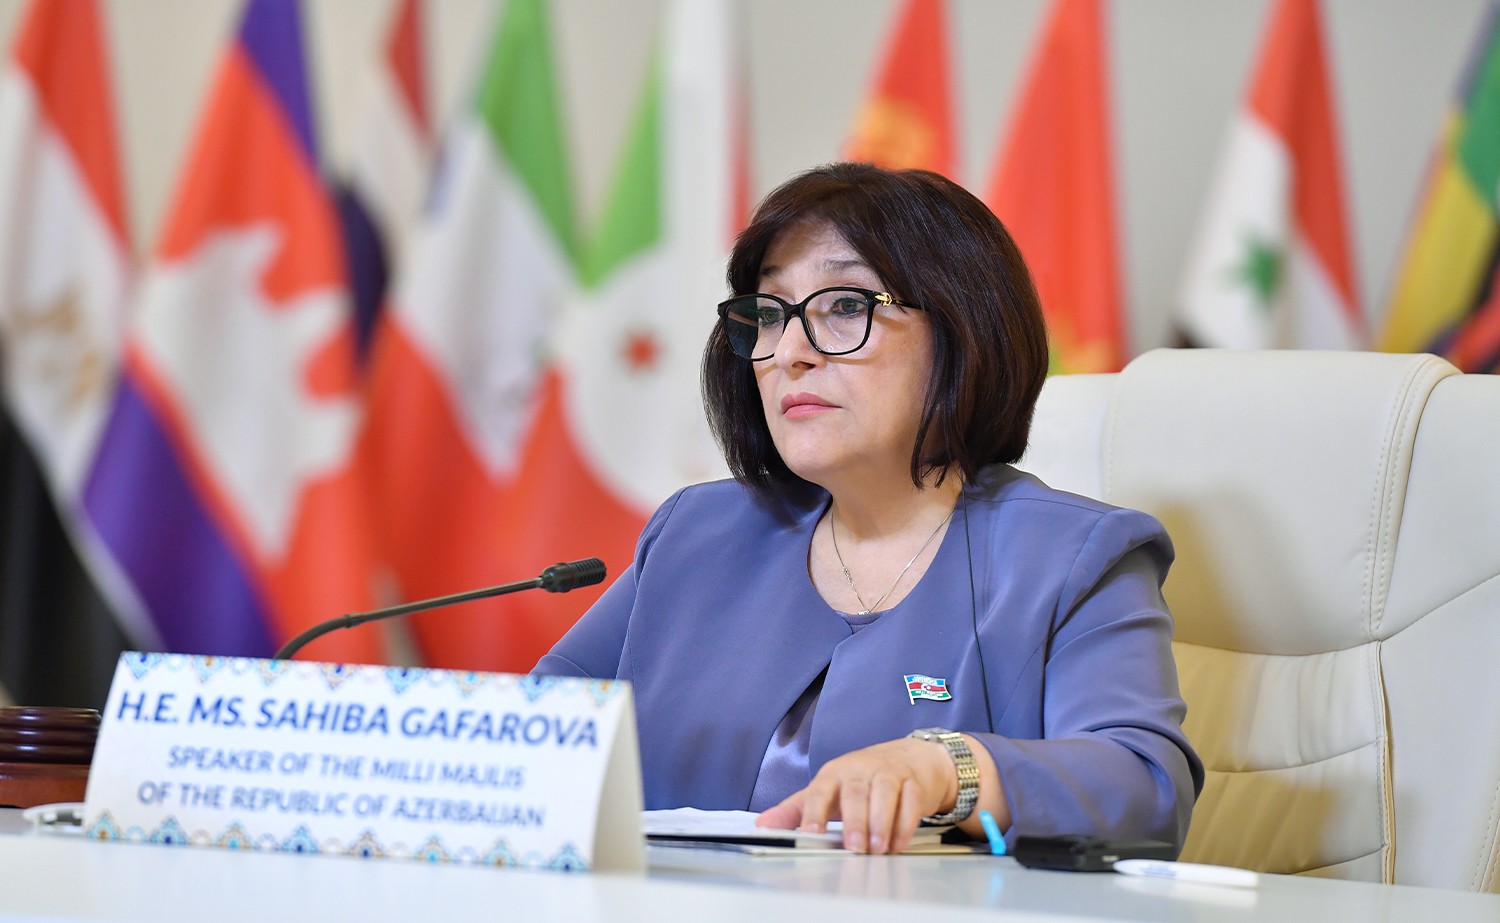 Baku Conference of Parliamentary Network of Non-Aligned Movement Has Been a Success